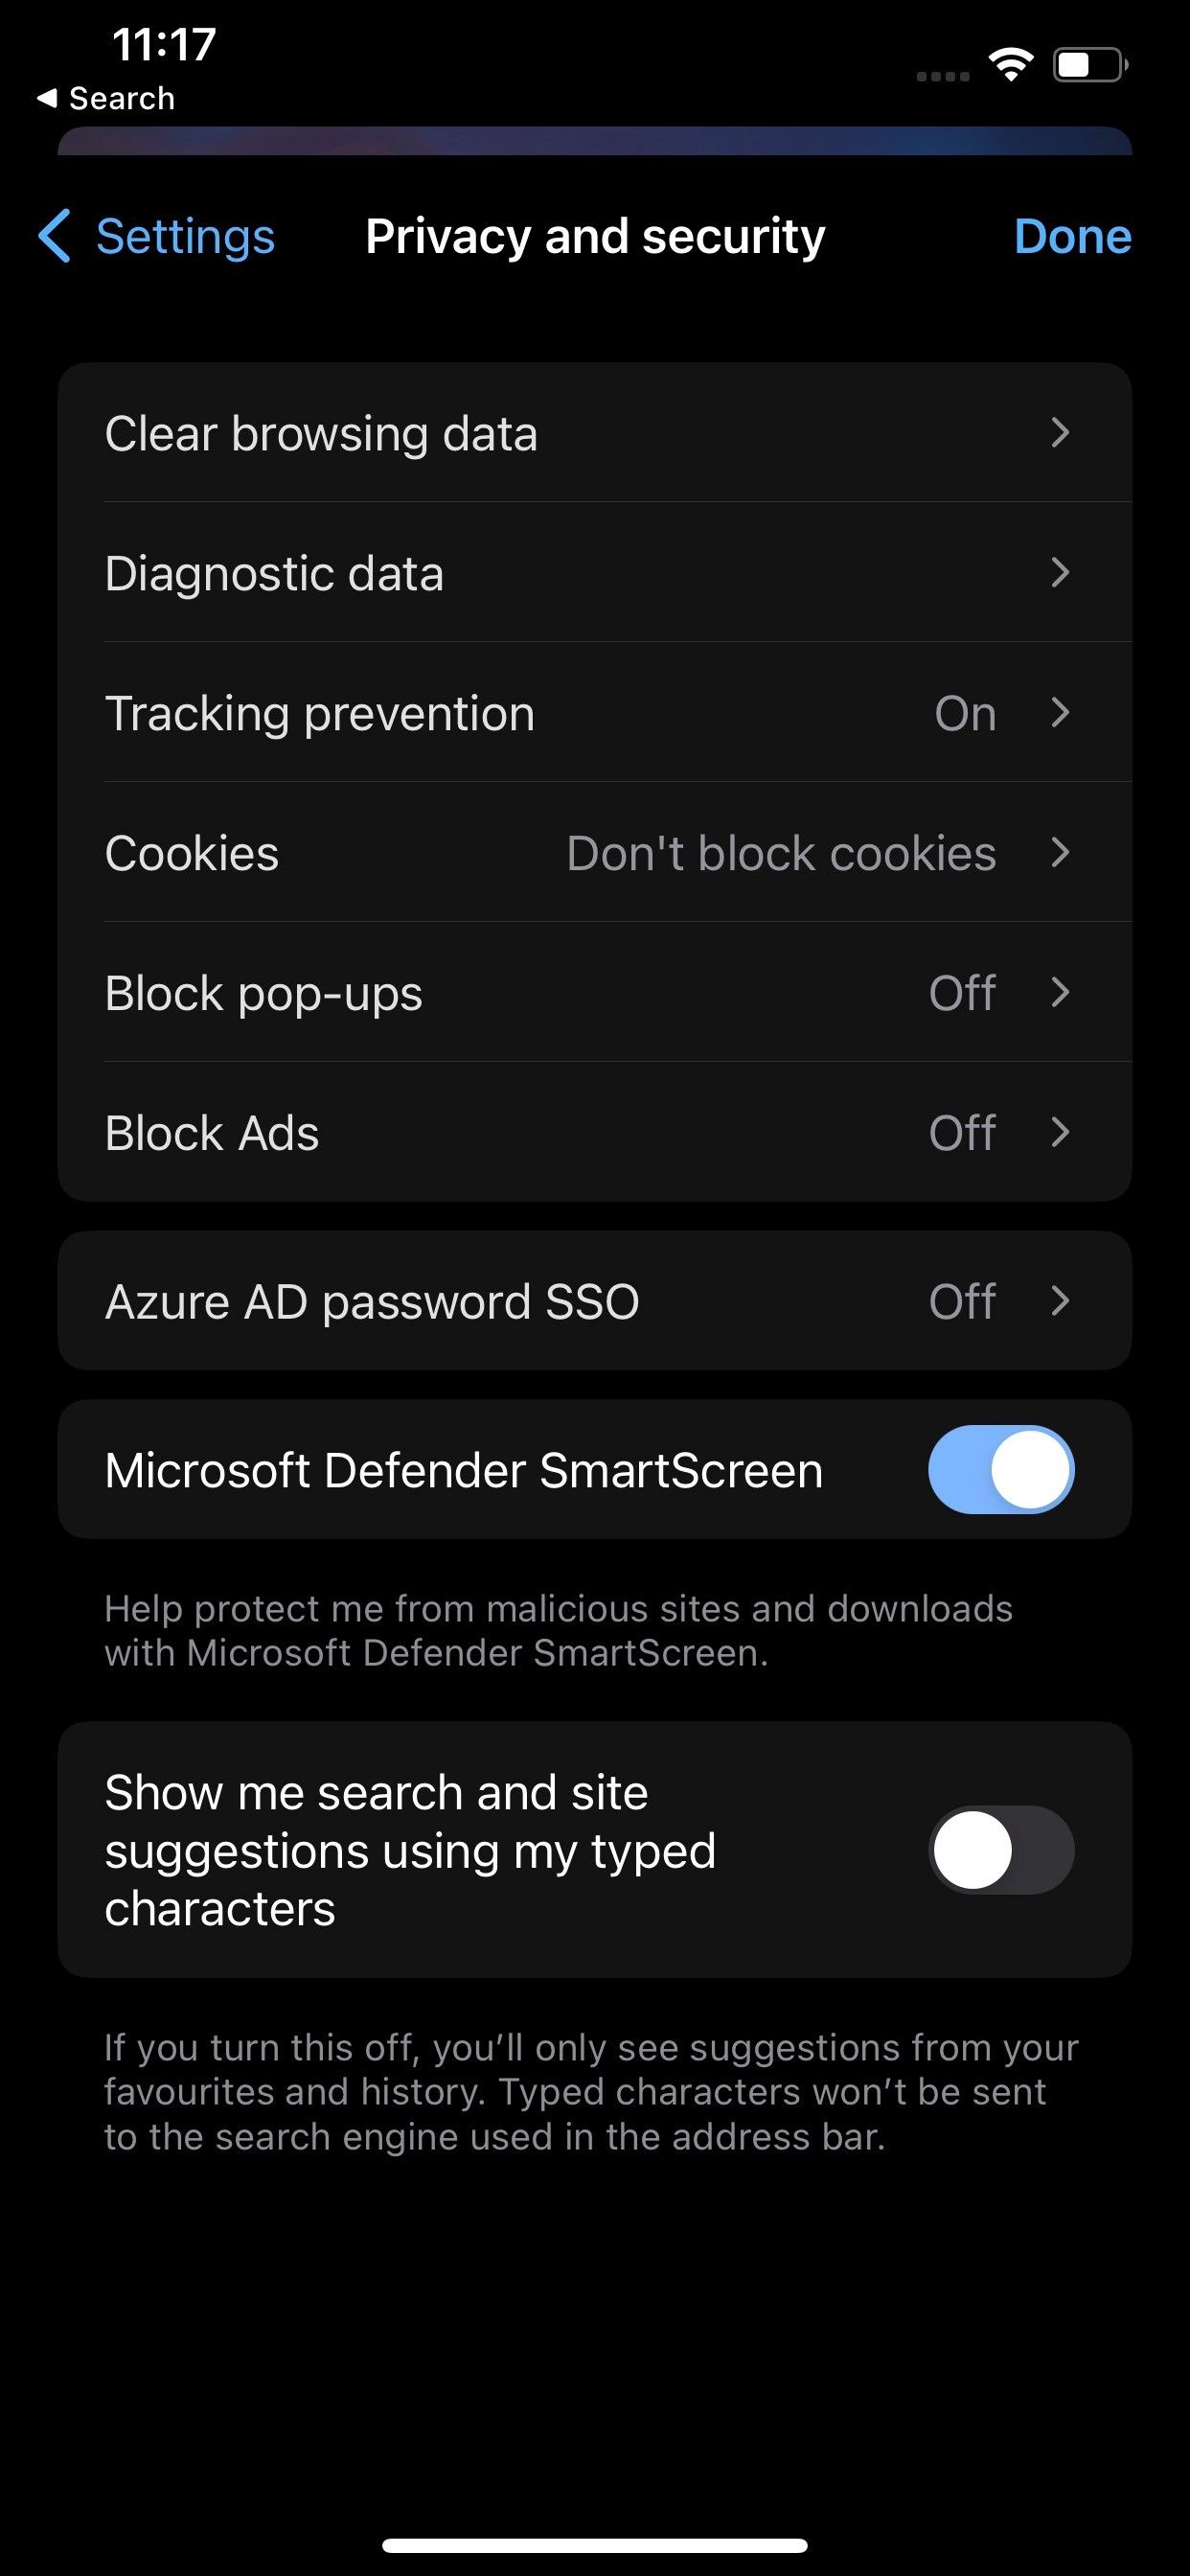 Locating Block Pop-ups Option in Privacy and Security Setting in Microsoft Edge for iOS